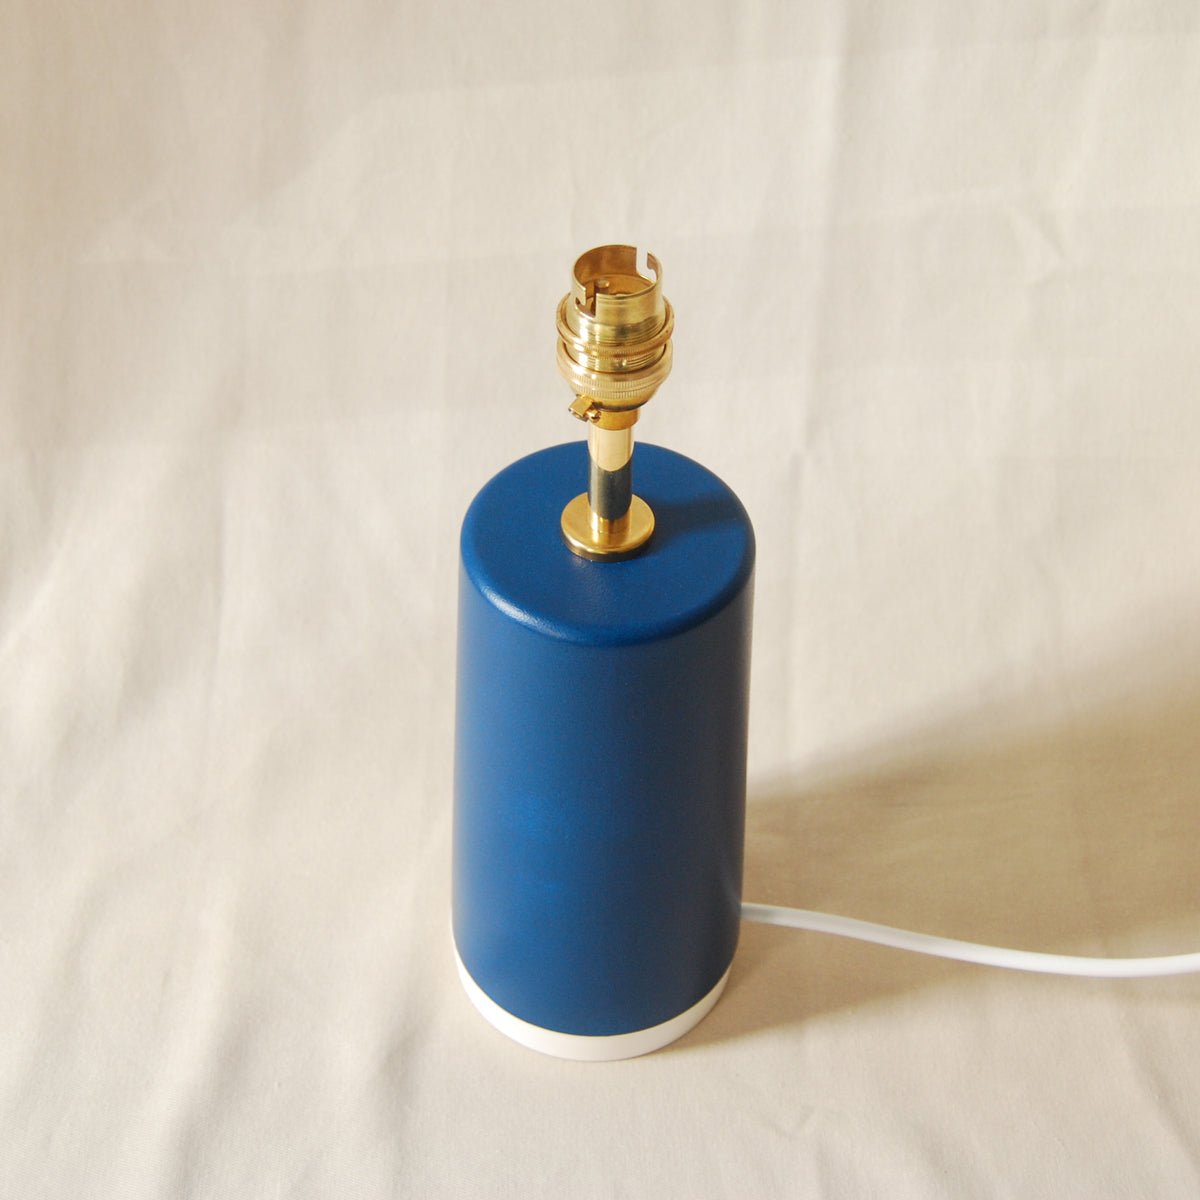 teal blue lamp base with brass fittings viewed from above with neutral background